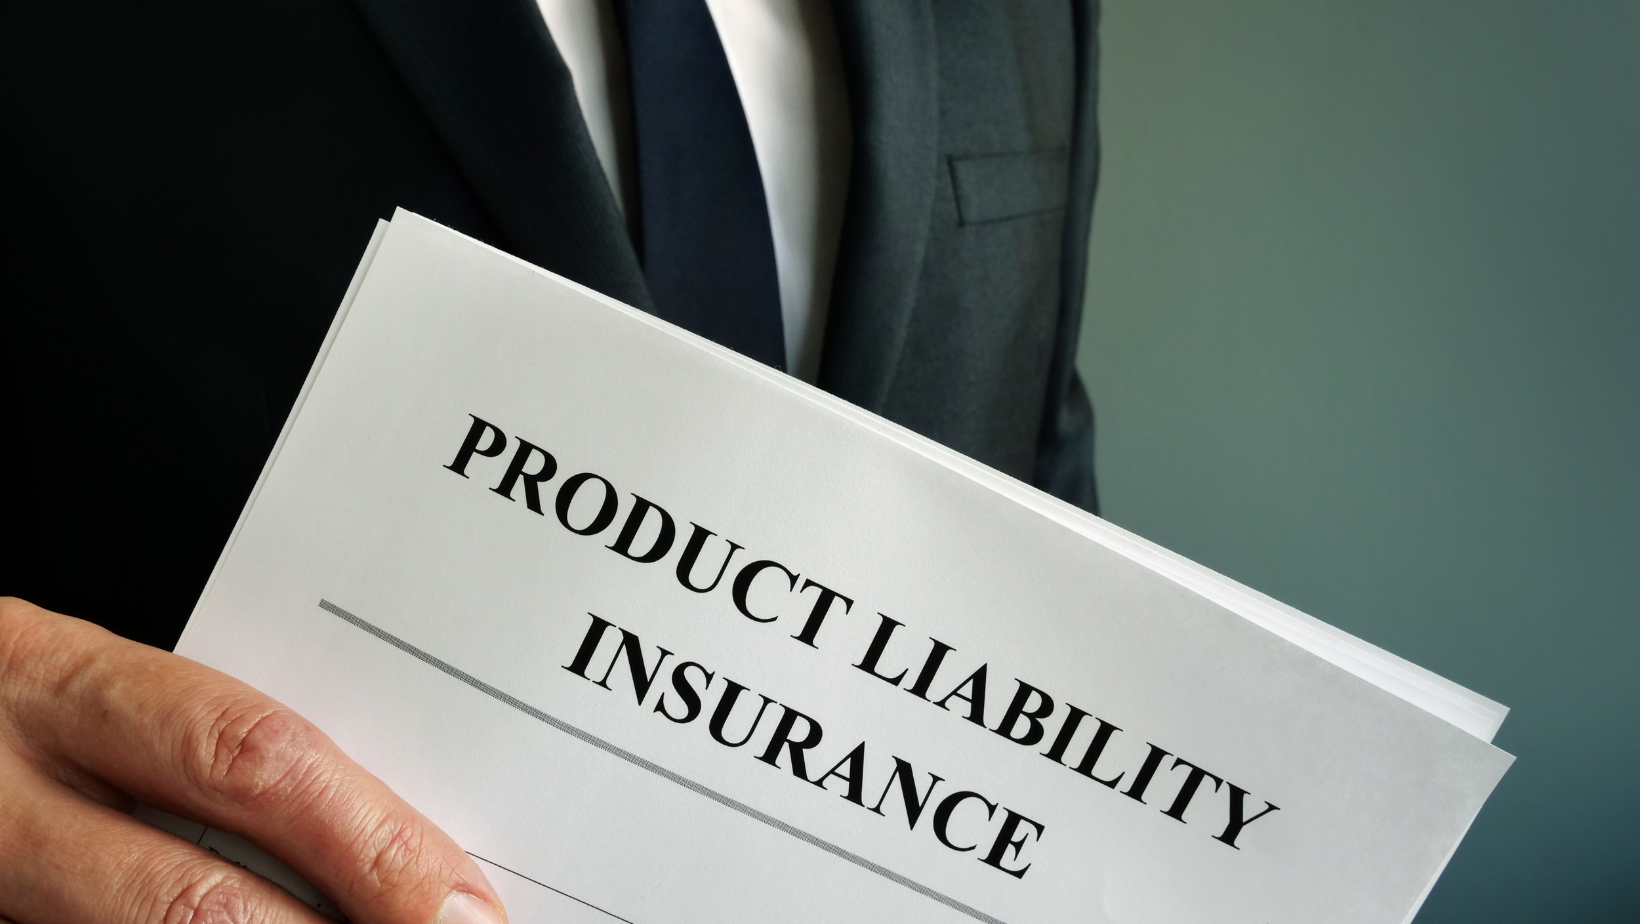 Things to avoid when dealing with premises liability cases